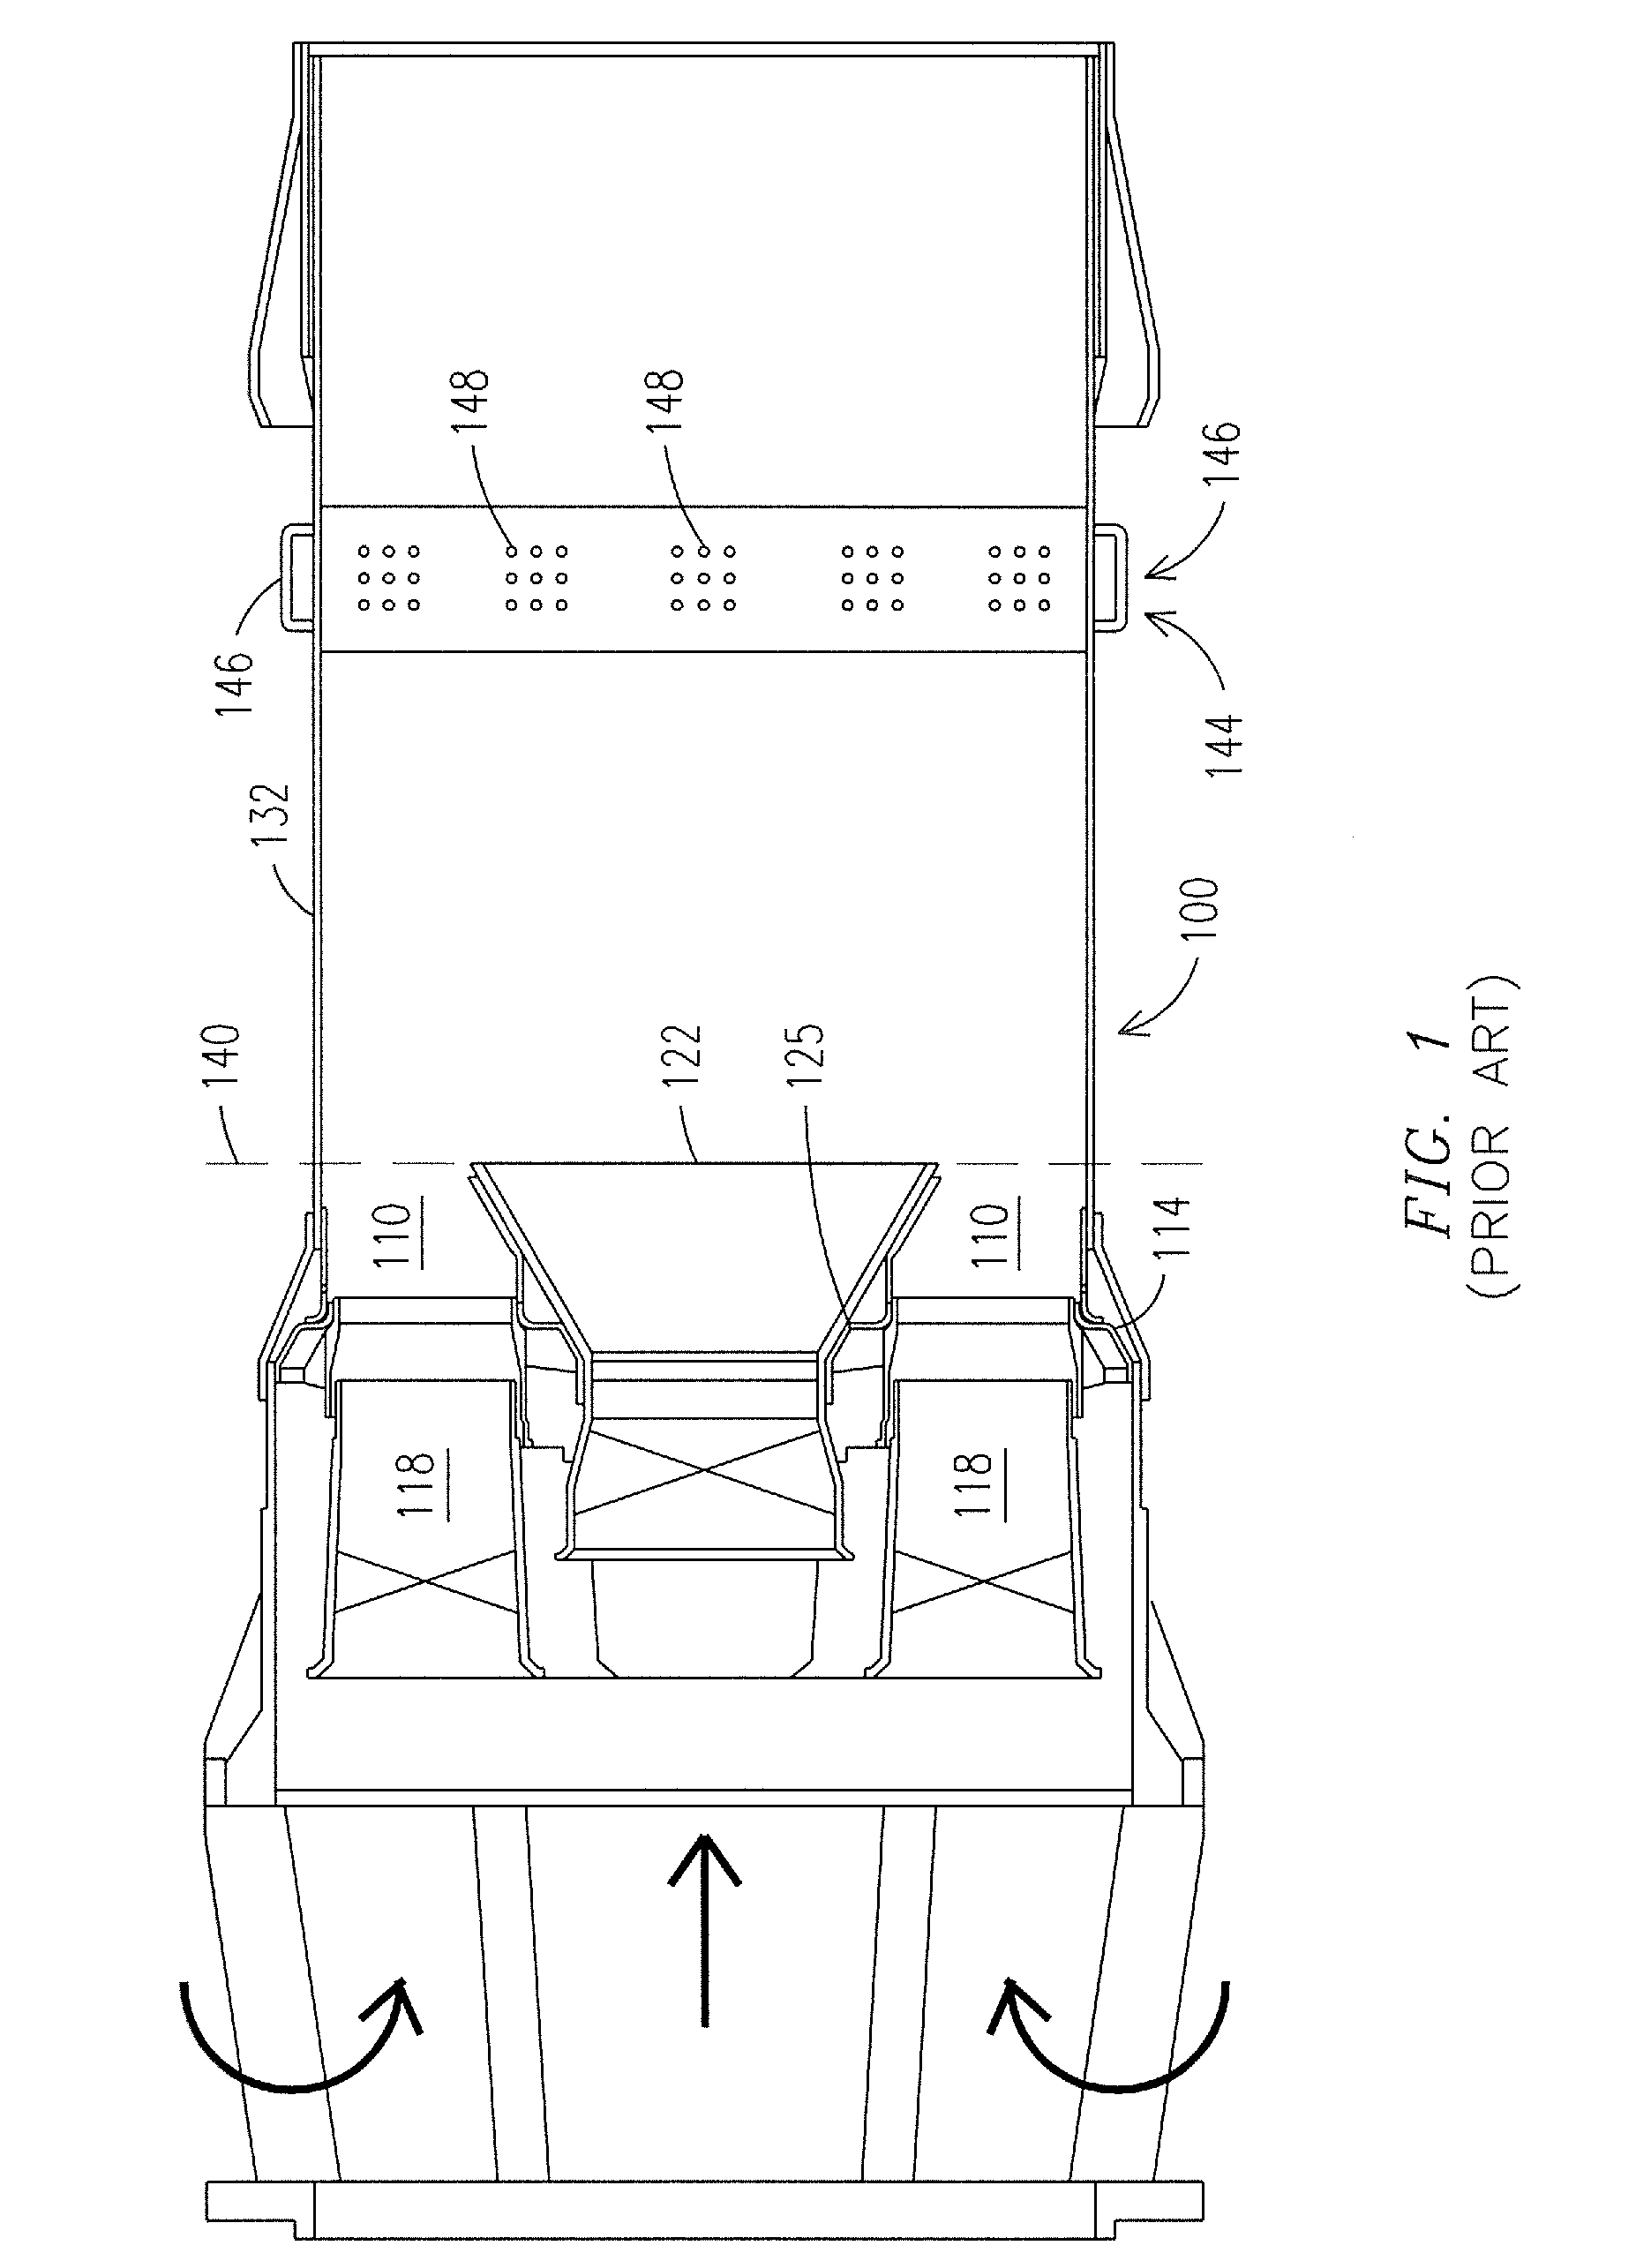 Forward-section resonator for high frequency dynamic damping